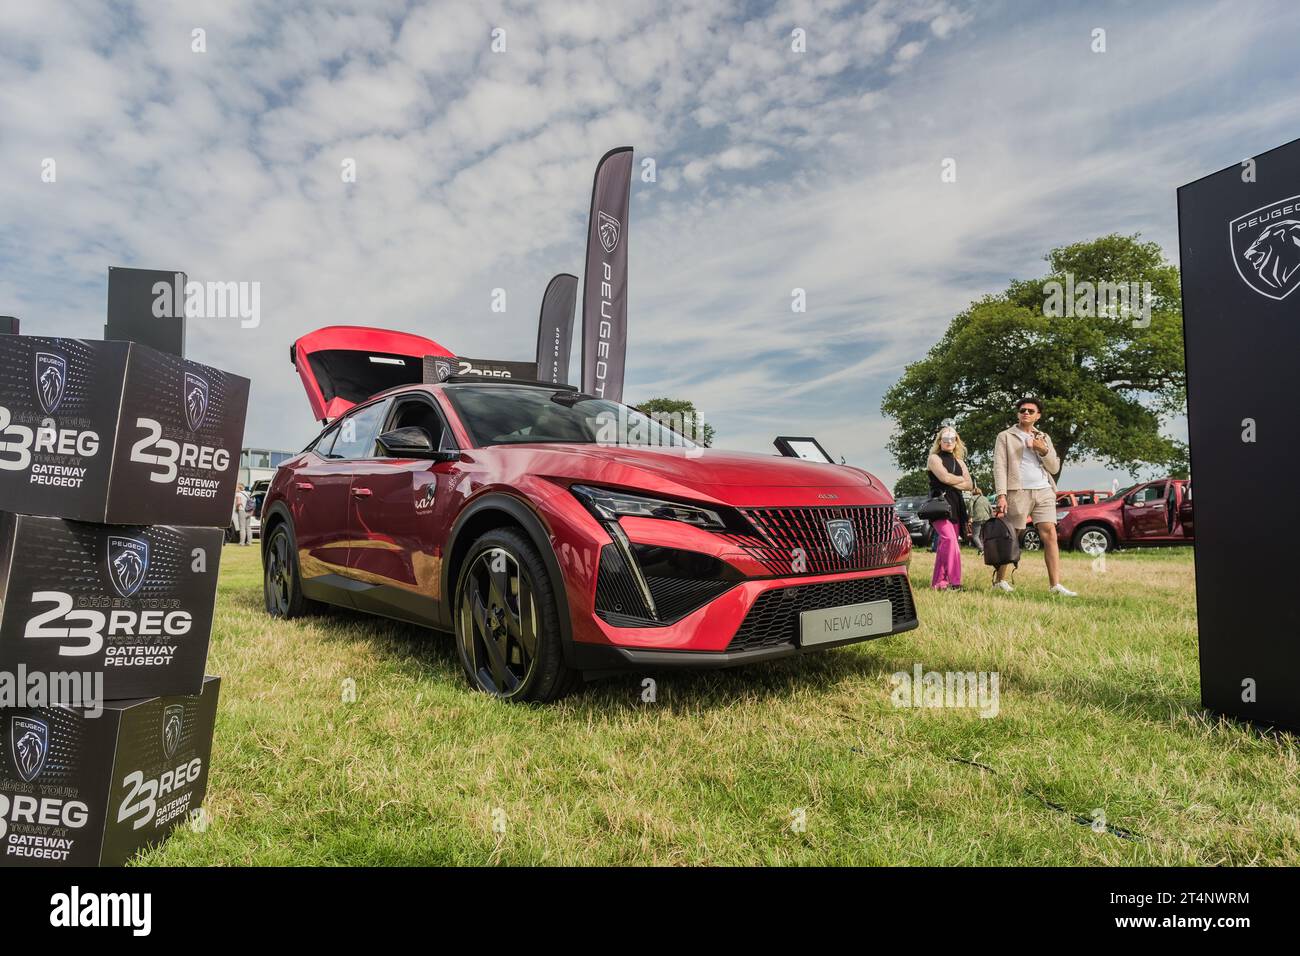 Nantwich, Cheshire, England, July 26th 2023. Red Peugeot 408 at an event display, automotive lifestyle editorial illustration. Stock Photo